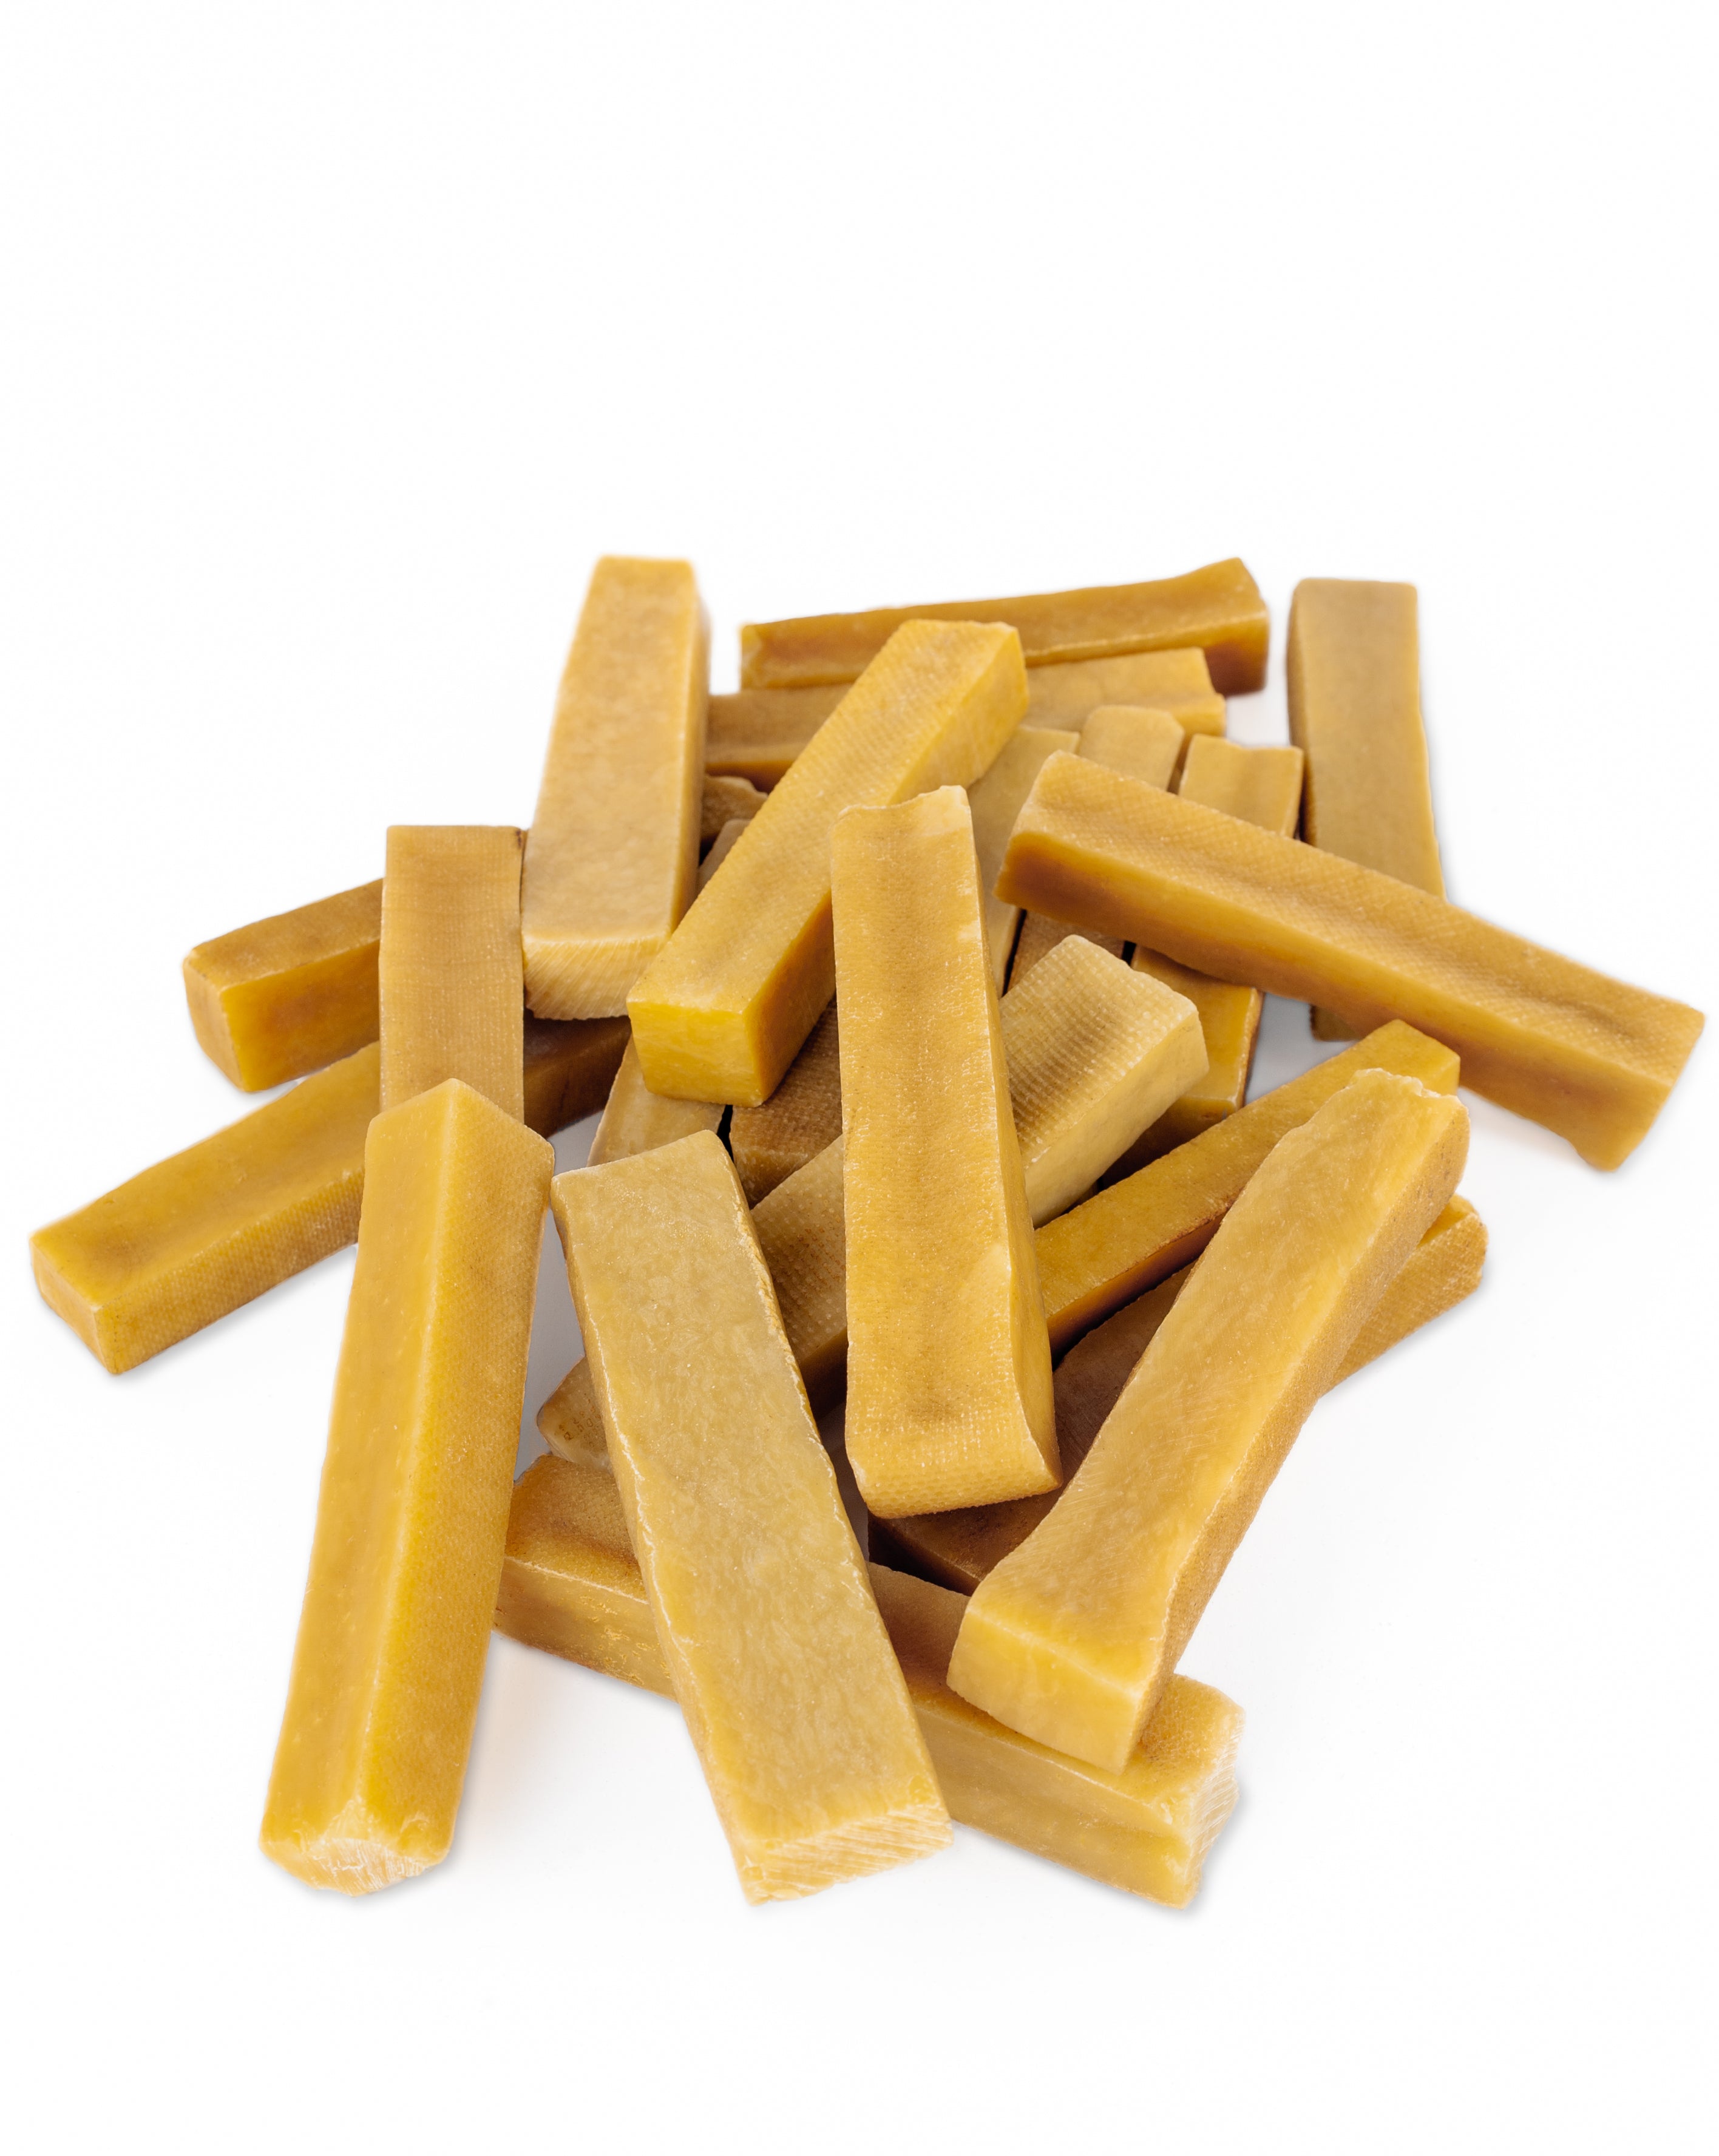 All-Natural Yak Cheese Dog Chews for Healthy Teeth and Gums (1 Pack, 2lb, 3lb, 5lb, or 10lb Bag)